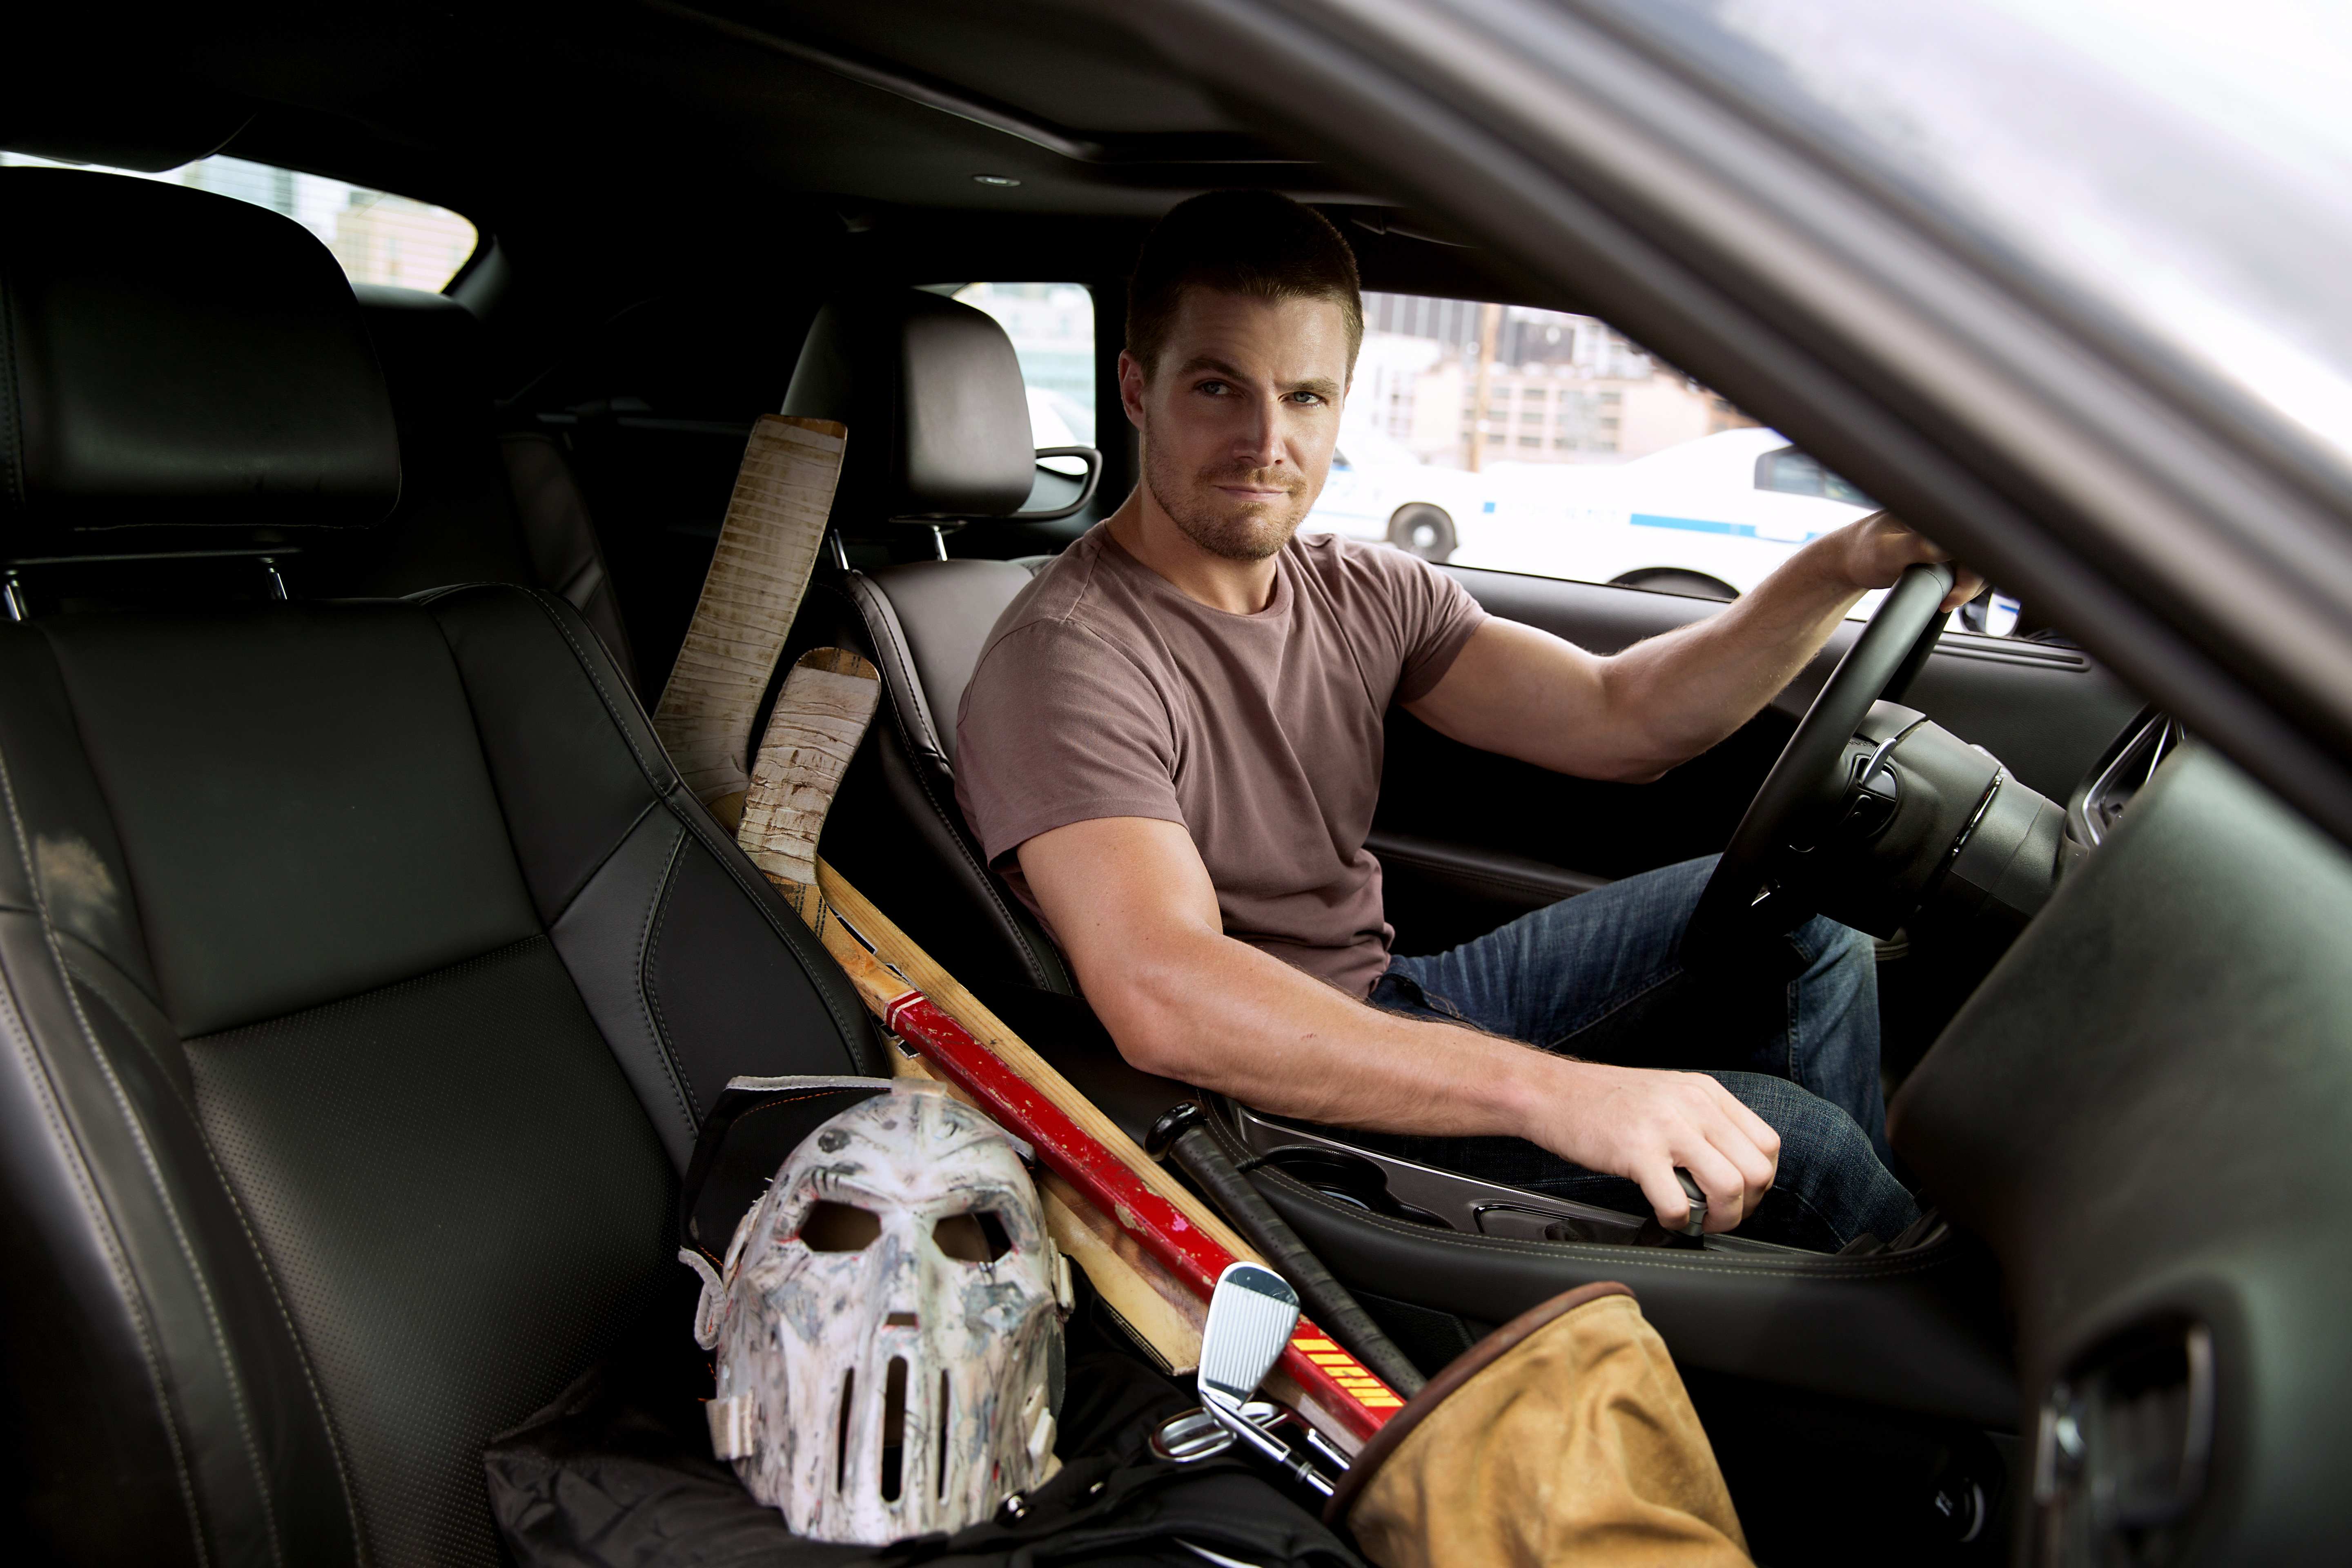 Stephen Amell as Casey Jones in Teenage Mutant Ninja Turtles: Out of the Shadows from Paramount Pictures, Nickelodeon Movies and Platinum Dunes